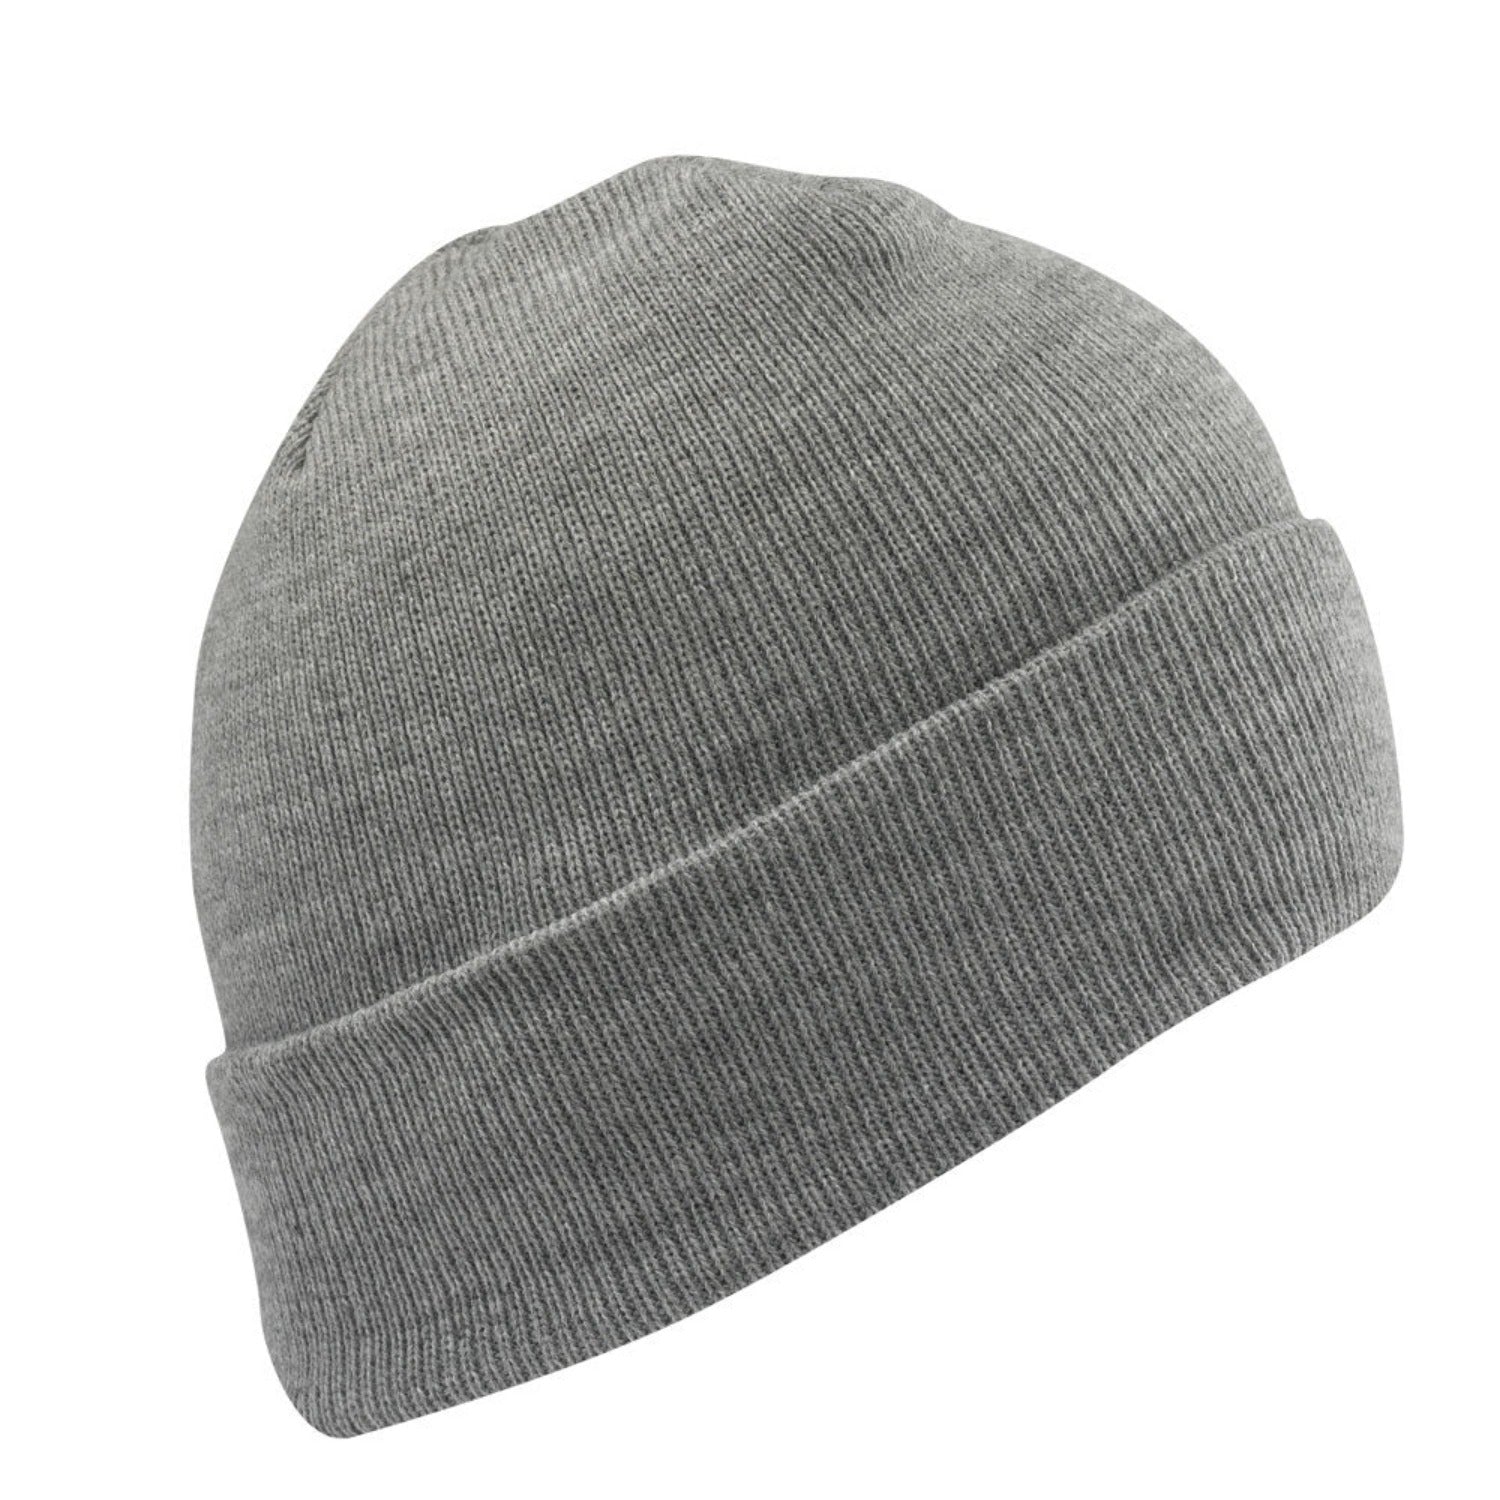 1017 Acrylic Hat - Light Charcoal full product perspective - made in The USA Wigwam Socks